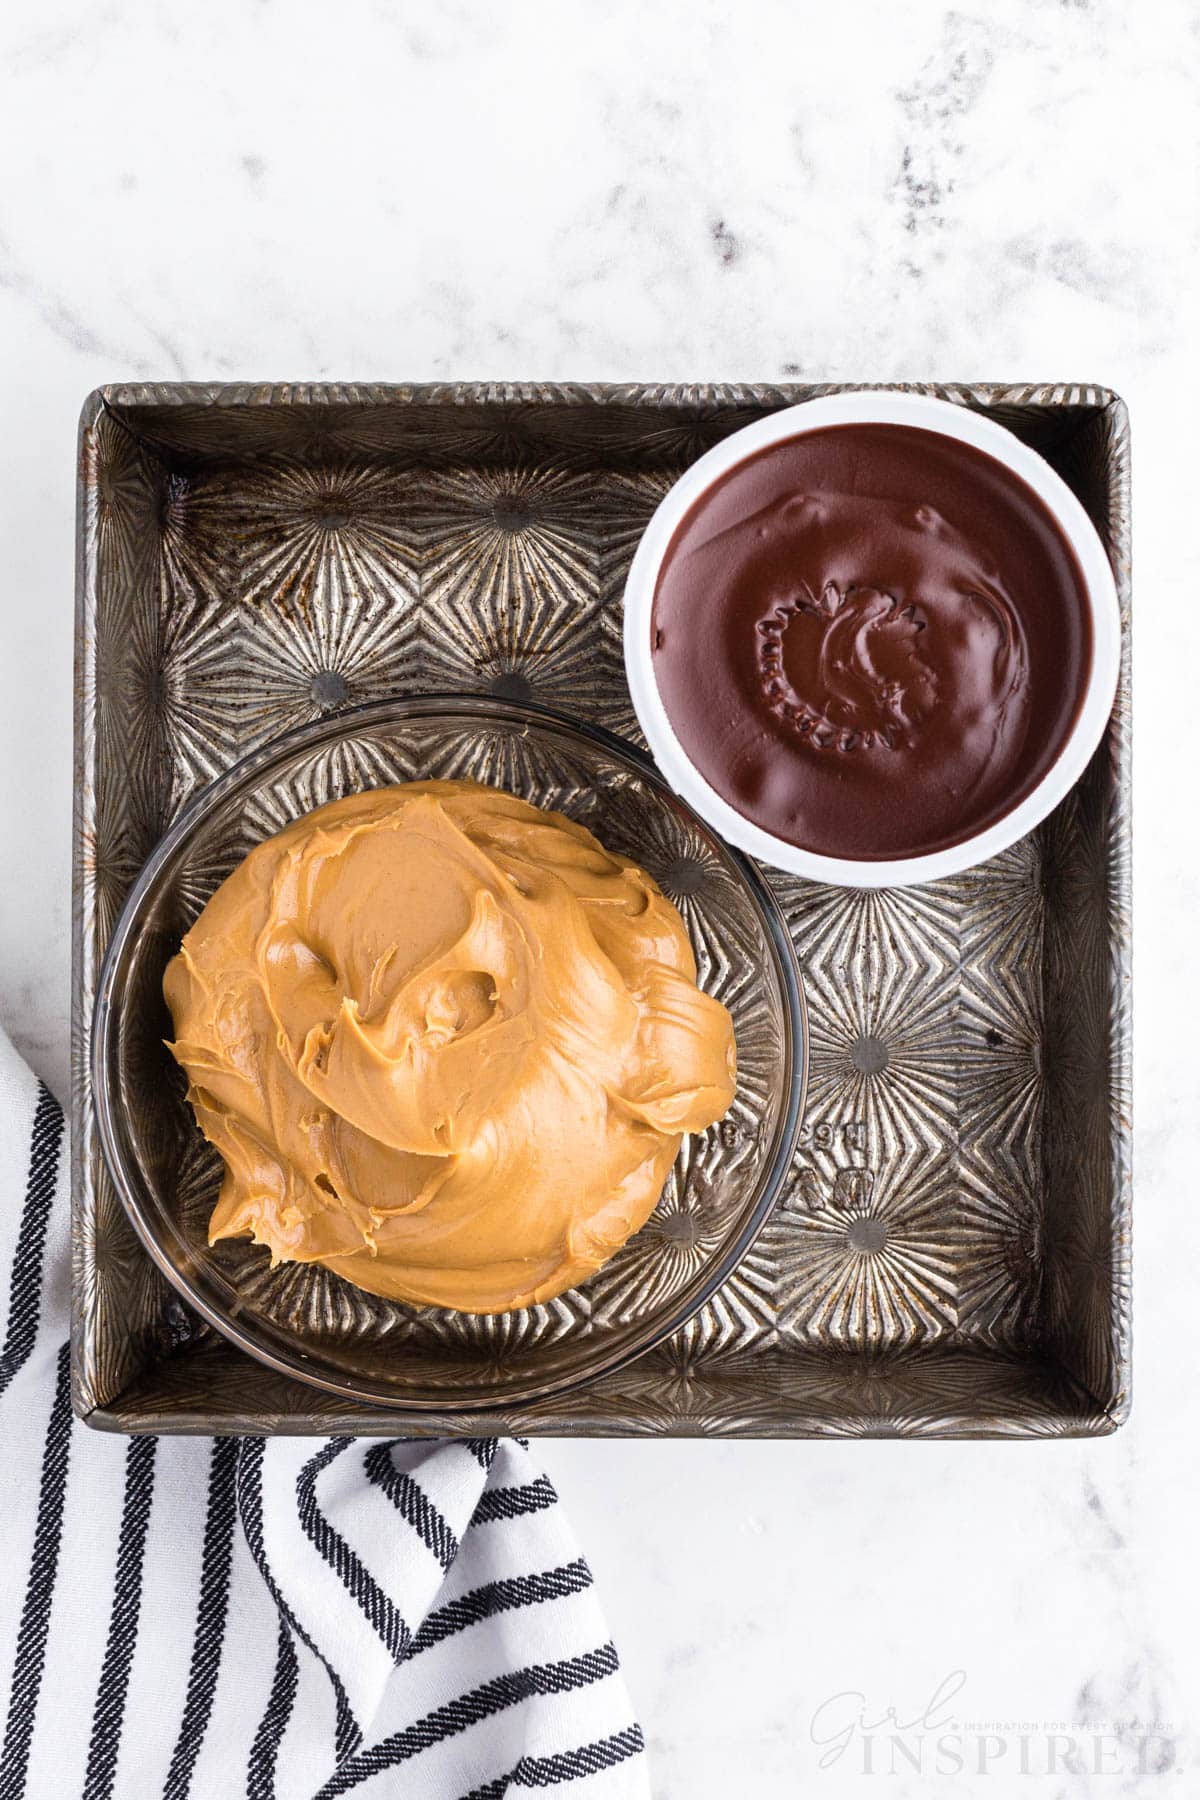 Metal baking tray with a bowl of creamy peanut butter and a bowl of chocolate frosting, striped linen, on a marble countertop.